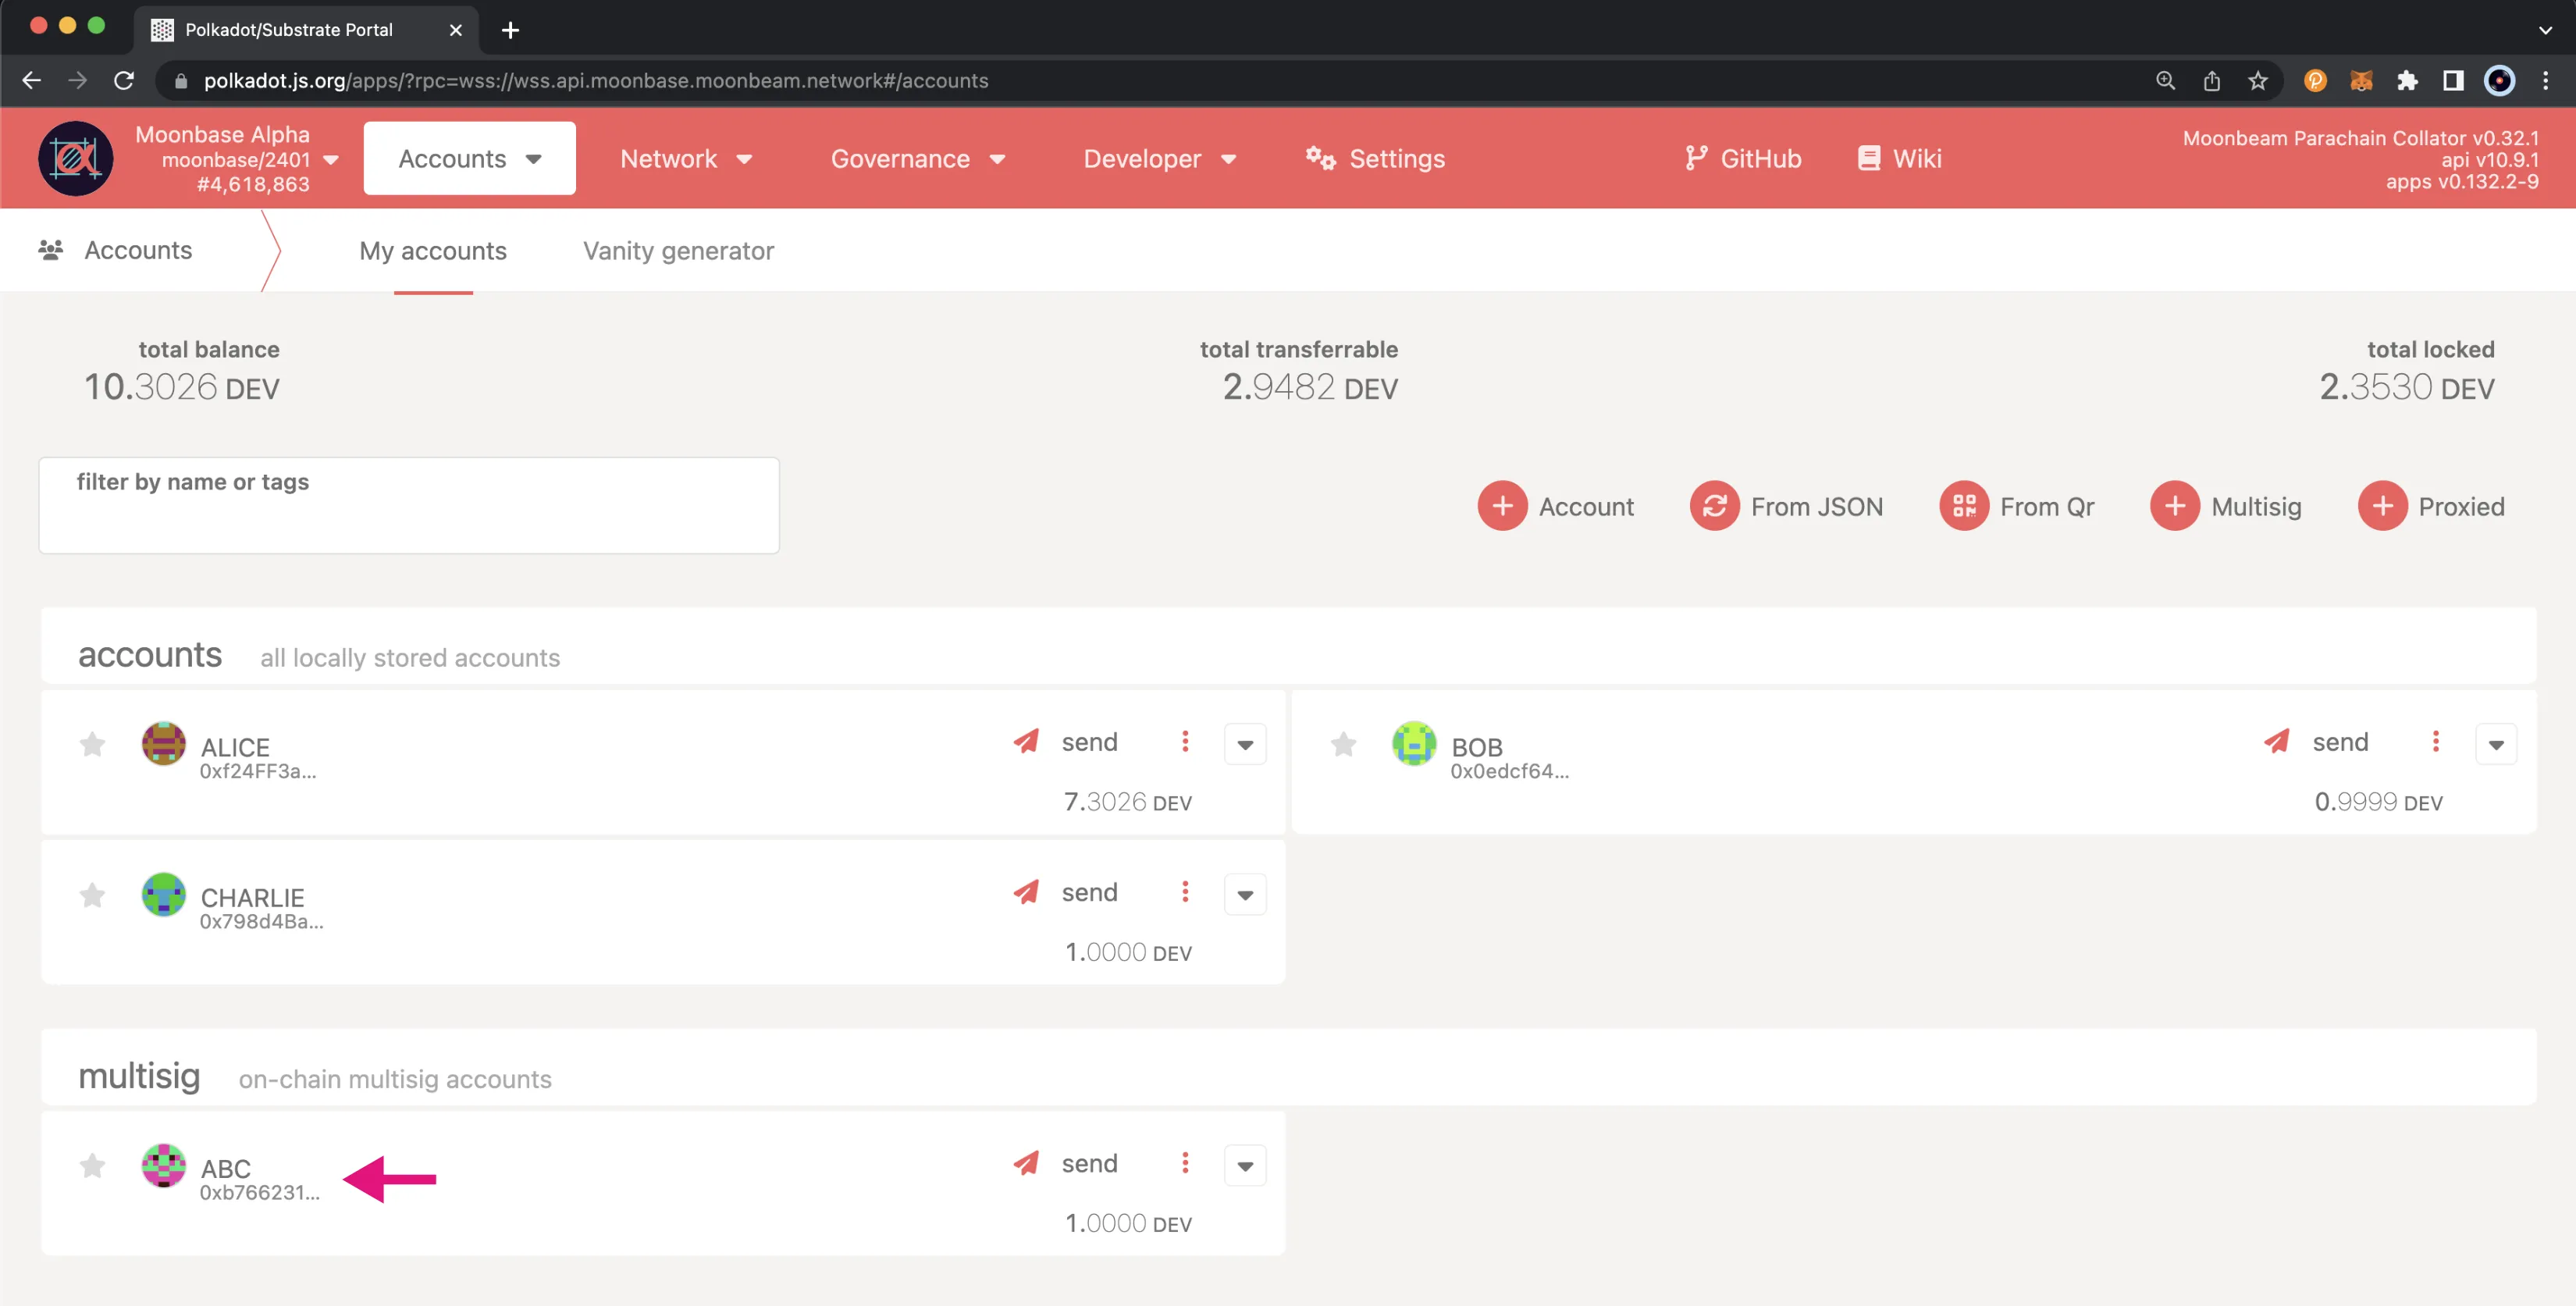 View the multisig account on the Accounts page of Polkadot.js Apps